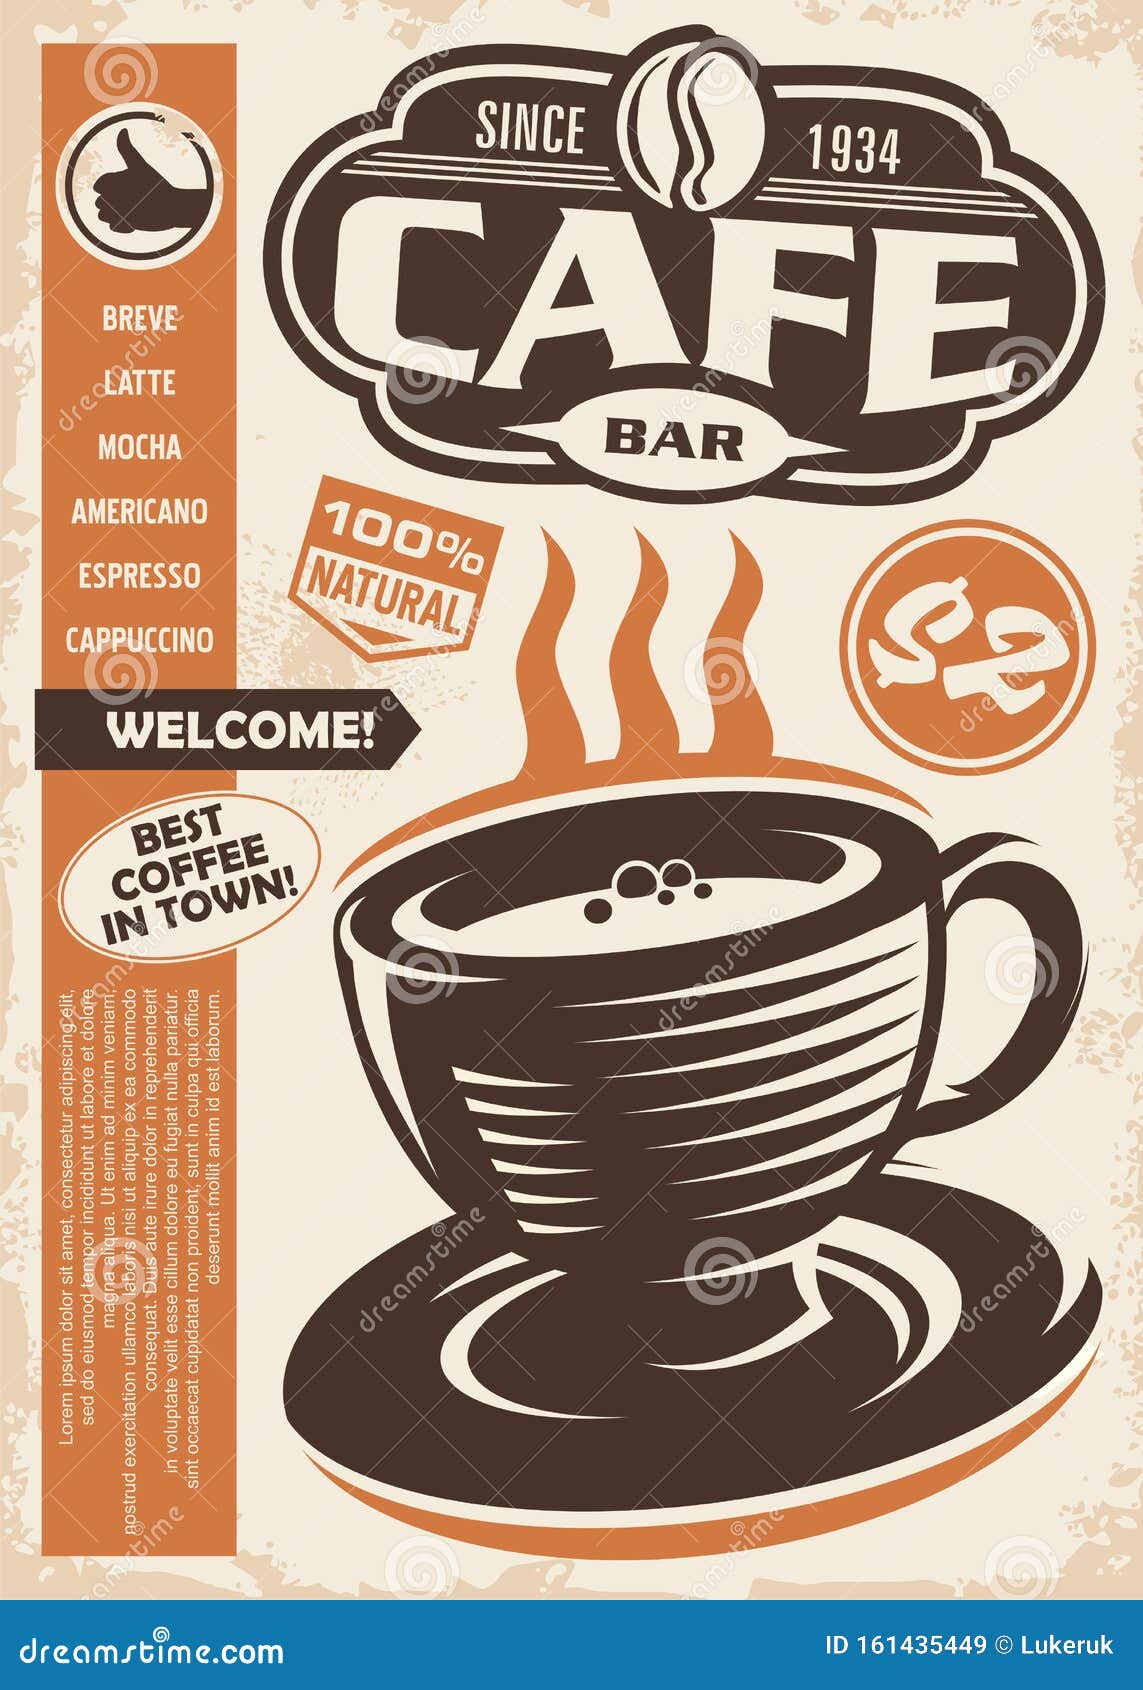 cafe bar retro ad with coffee cup and menu list